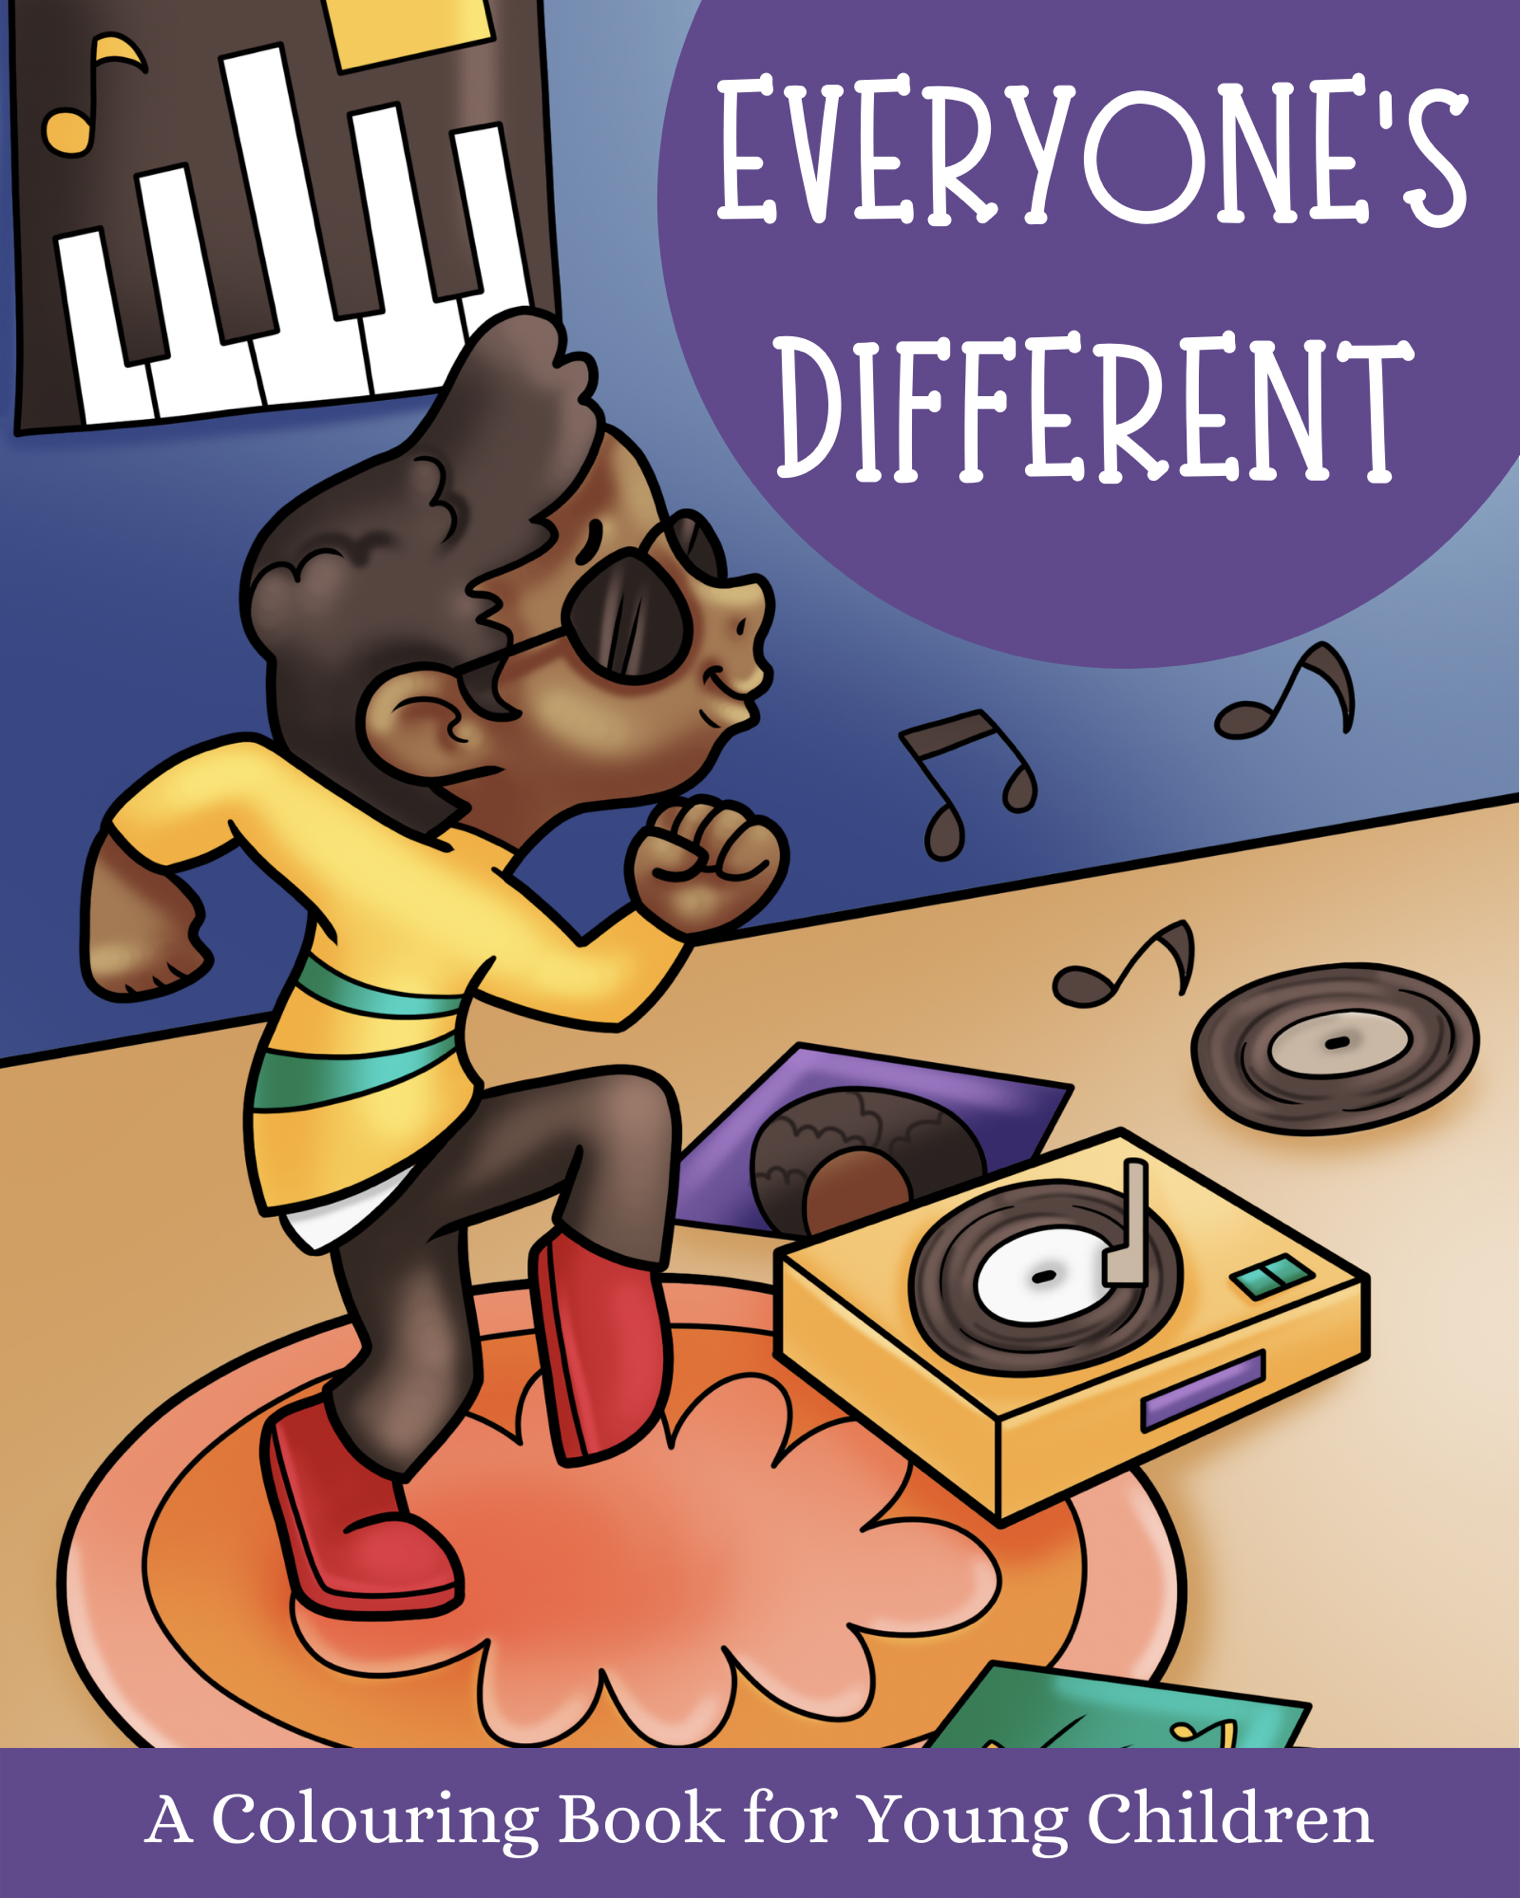 Everyone's Different - A Colouring Book for Children